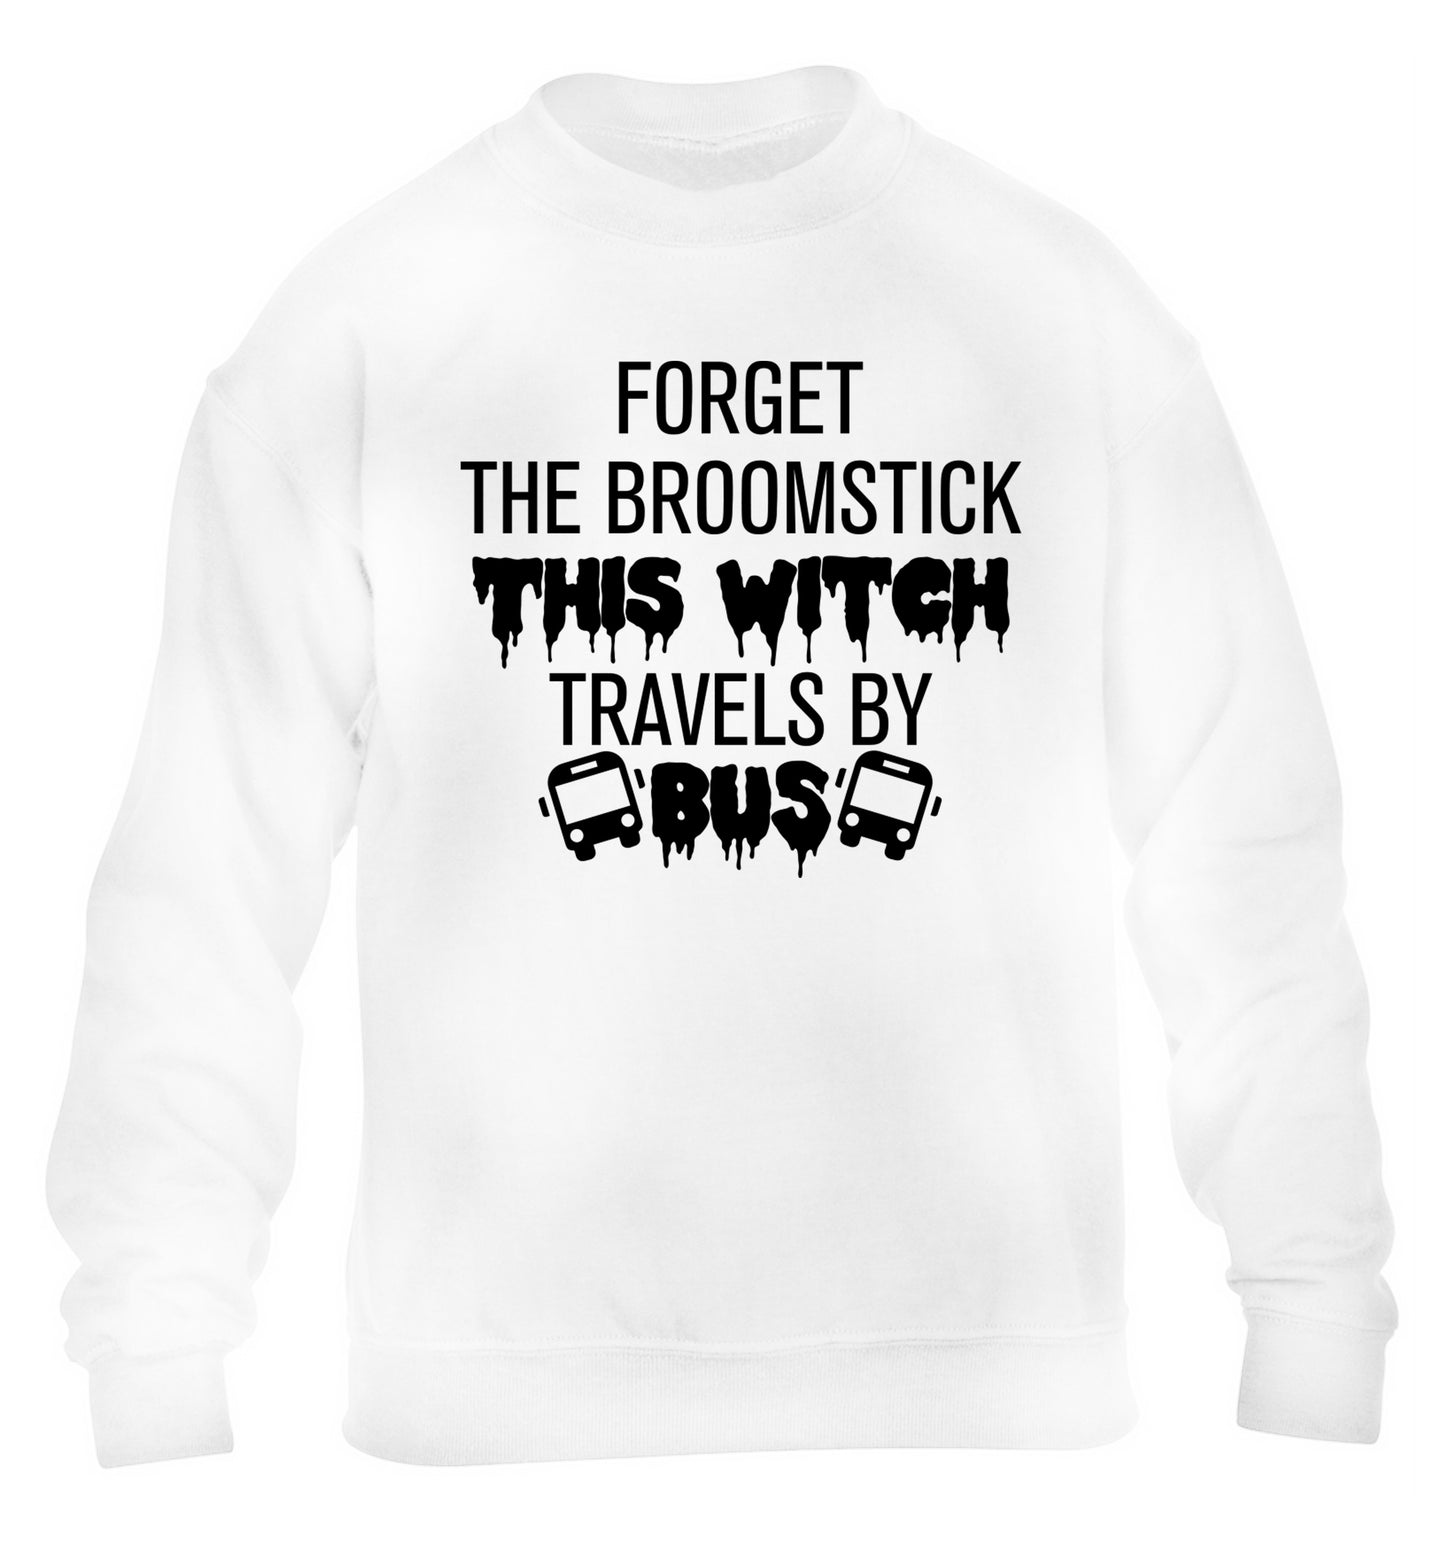 Forget the broomstick this witch travels by bus children's white sweater 12-14 Years